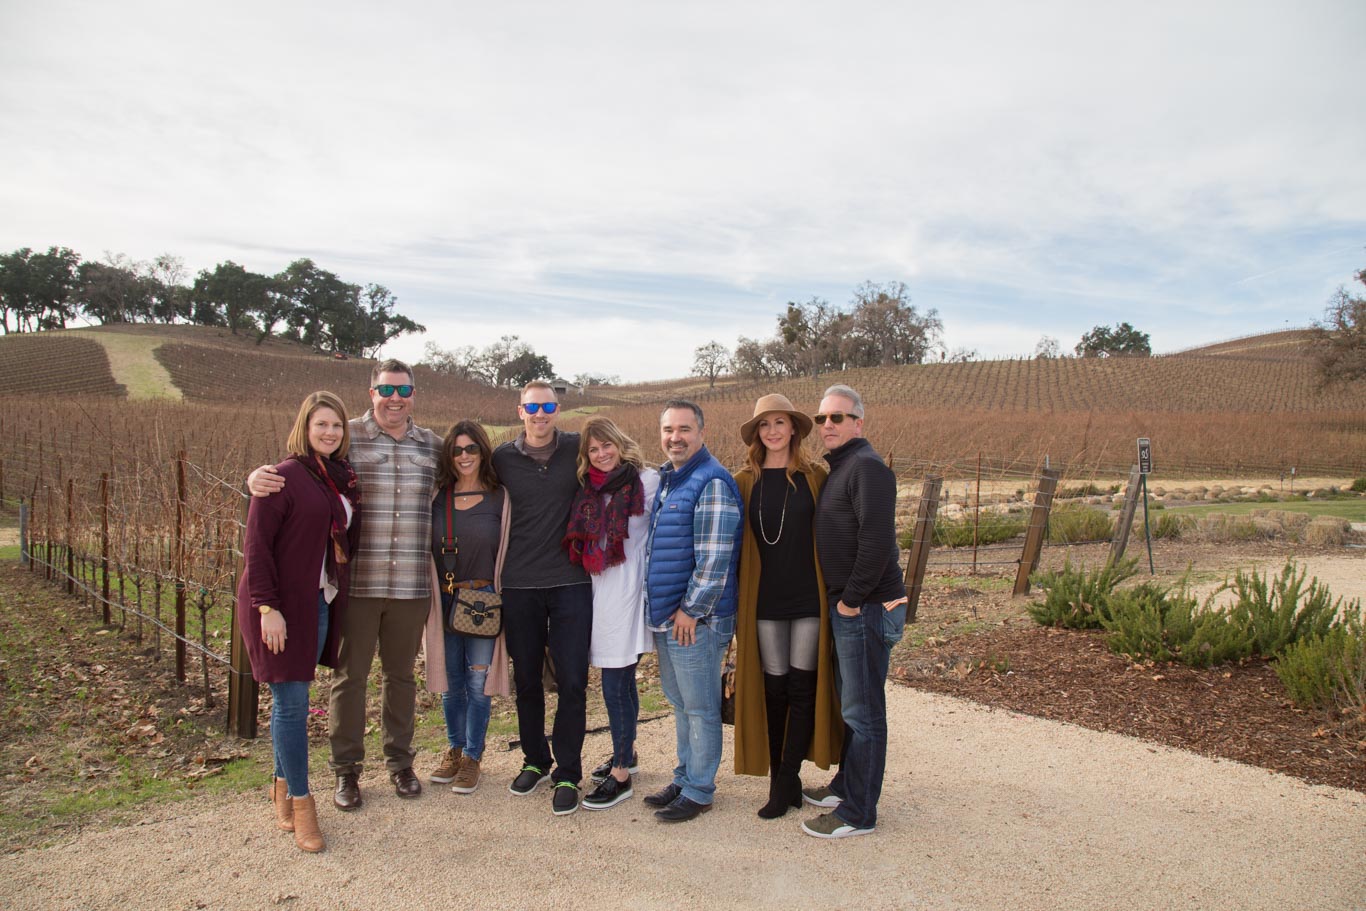 Justin Winery in Paso Robles - A picture of our group for Rick's 50th Birthday